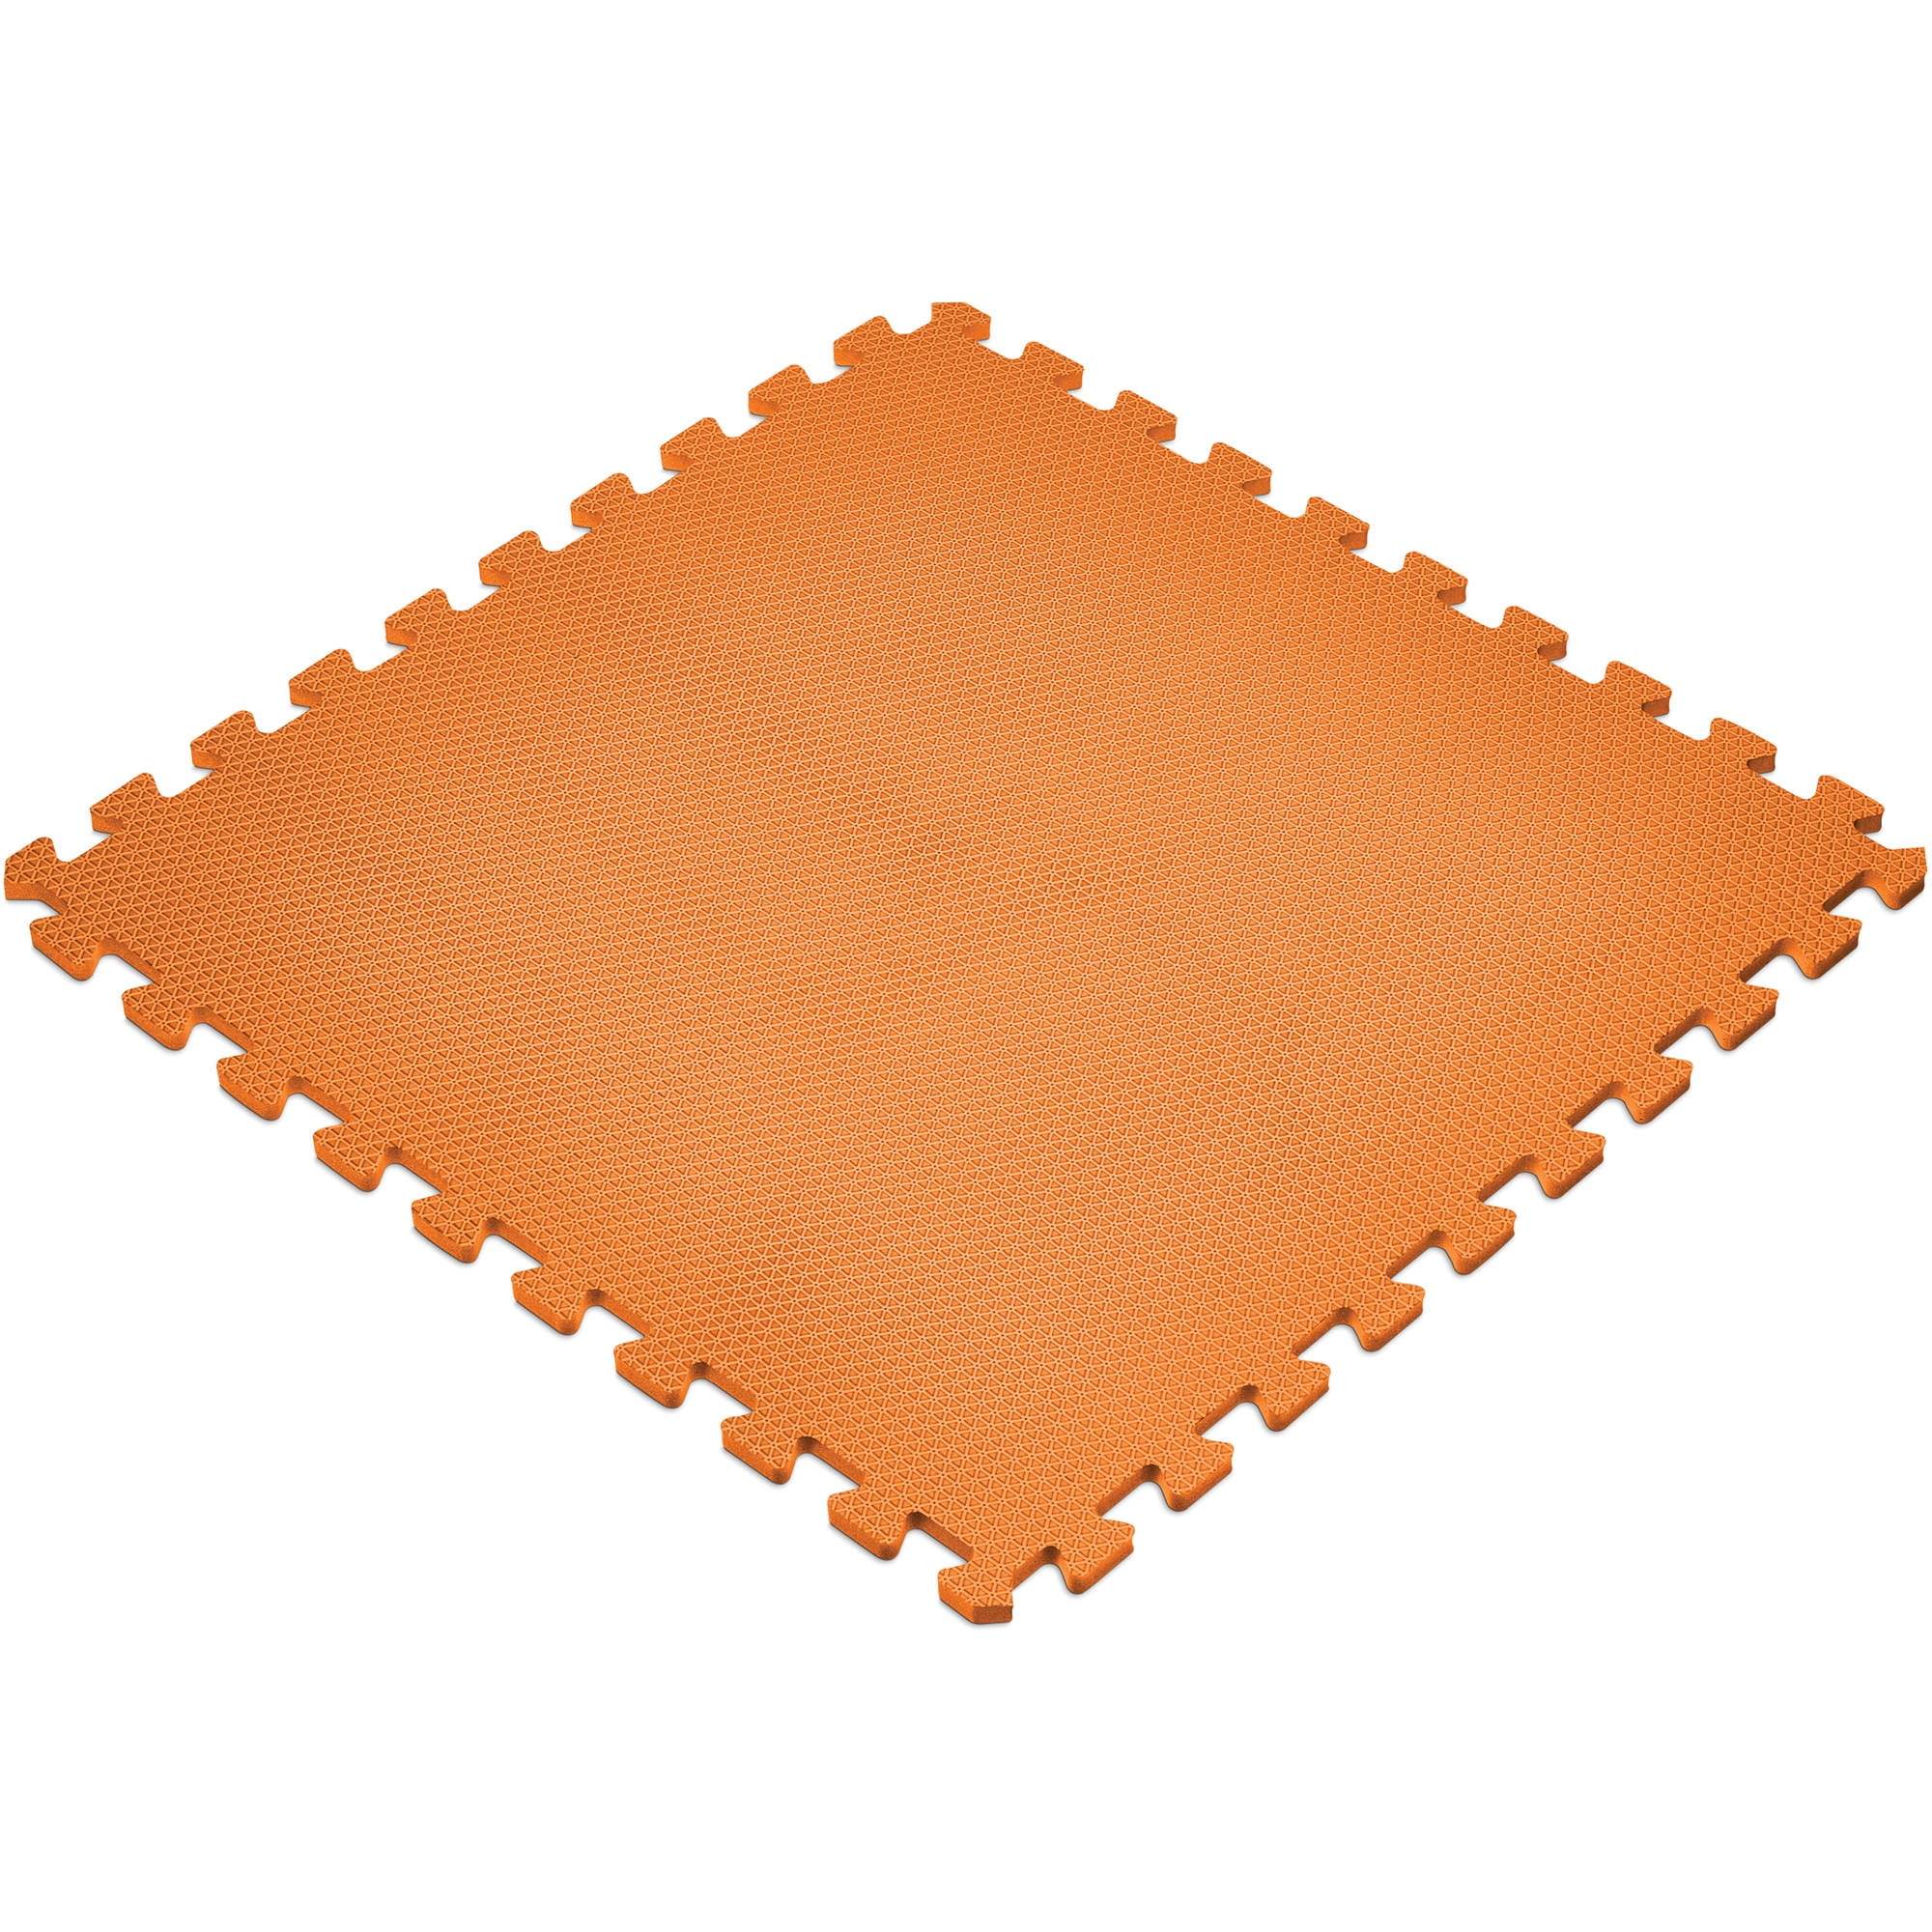 24 square feet classroom gym 24 inch orange puzzle mat eva foam top safety rated 